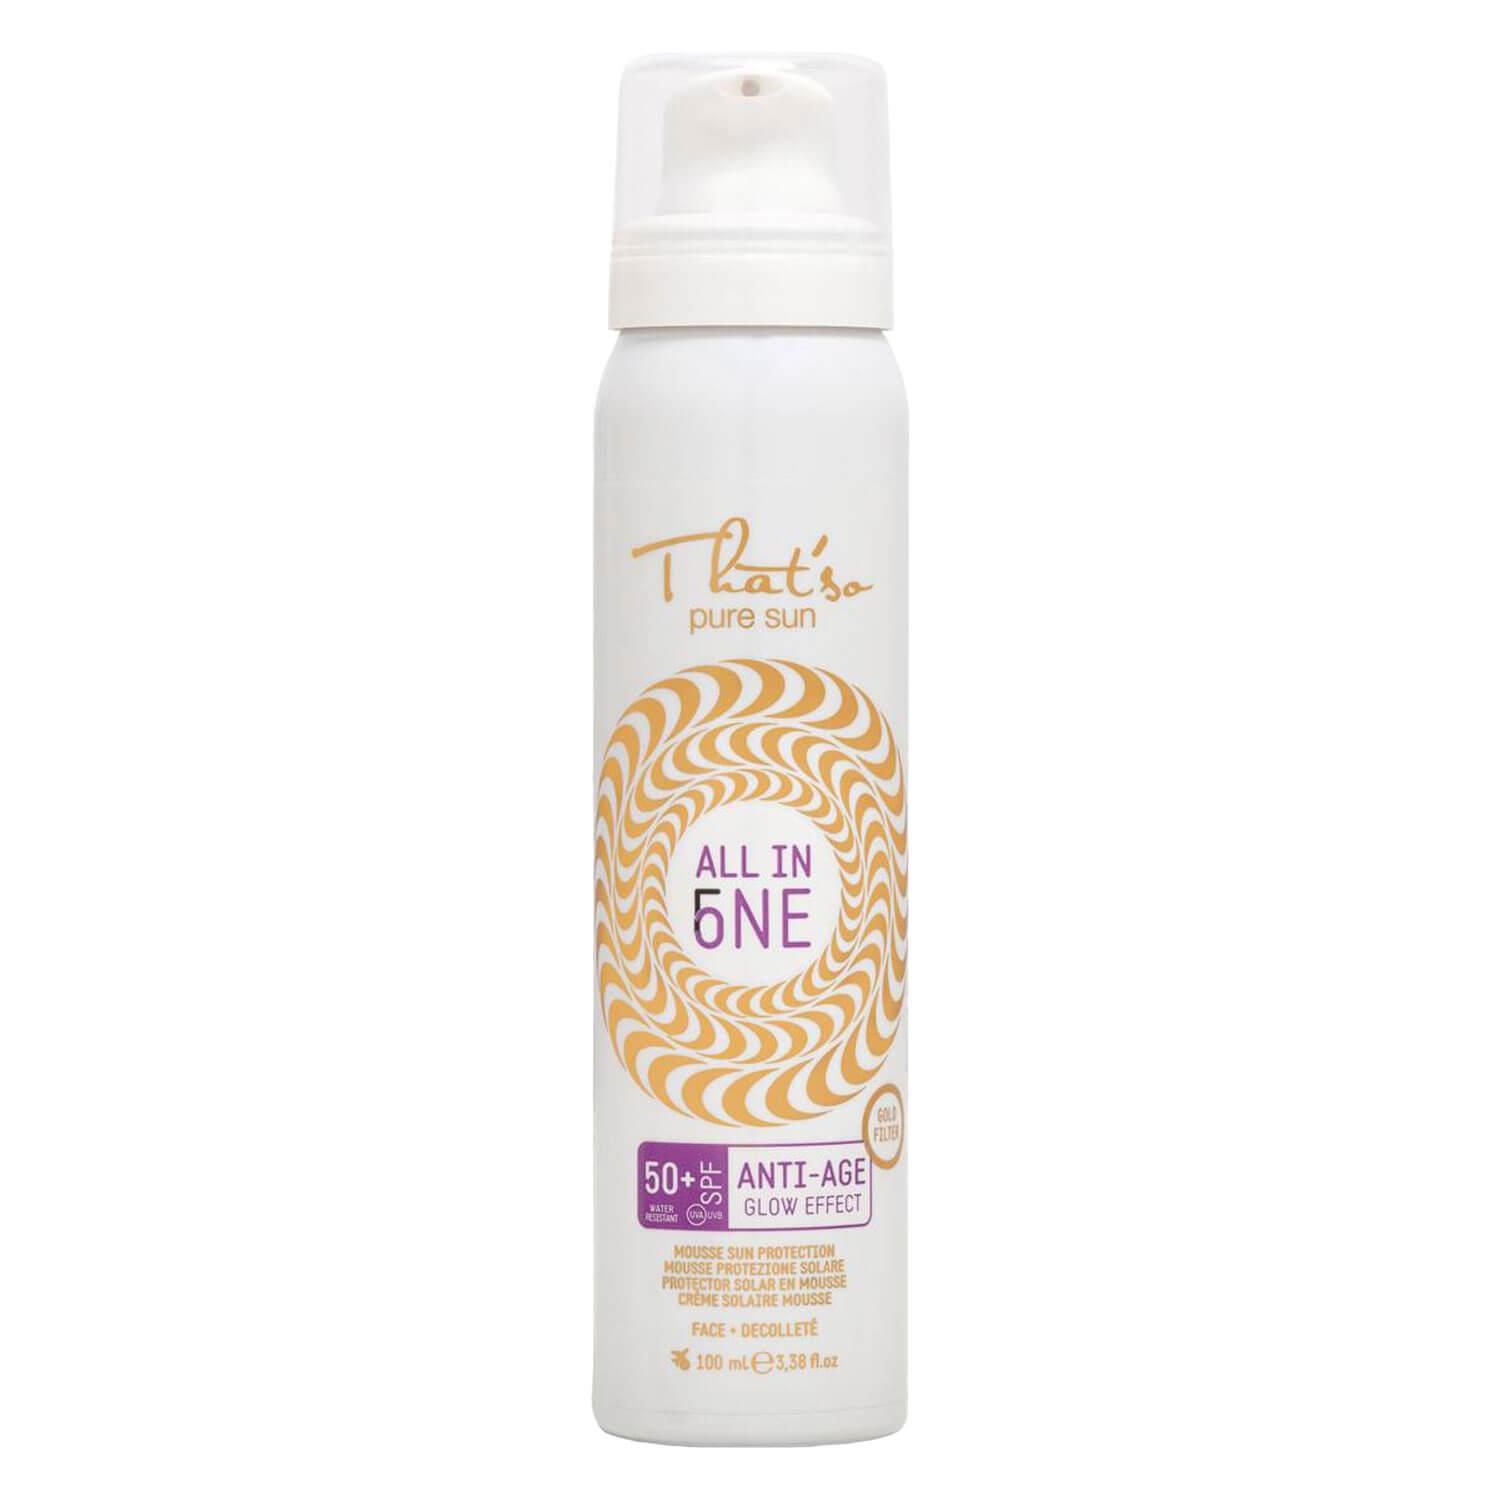 That'so - ALL IN ONE ANTI-AGE MOUSSE SUN PROTECTION SPF 50+